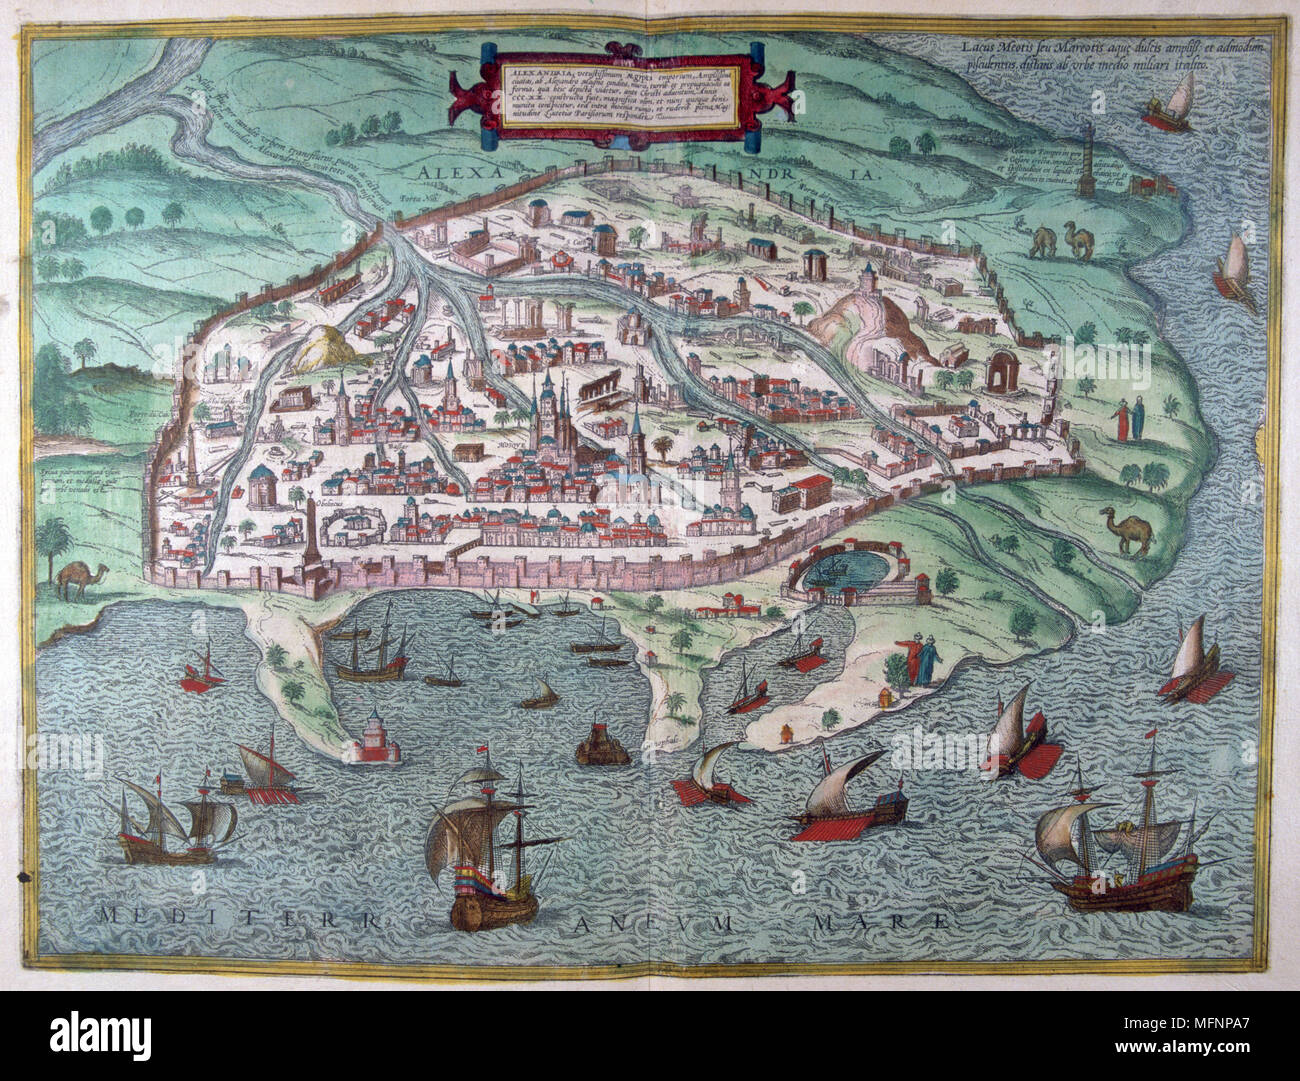 Alexandria with Mosque in centre of the city, and its harbour, Egypt, from an 18th century map. Stock Photo